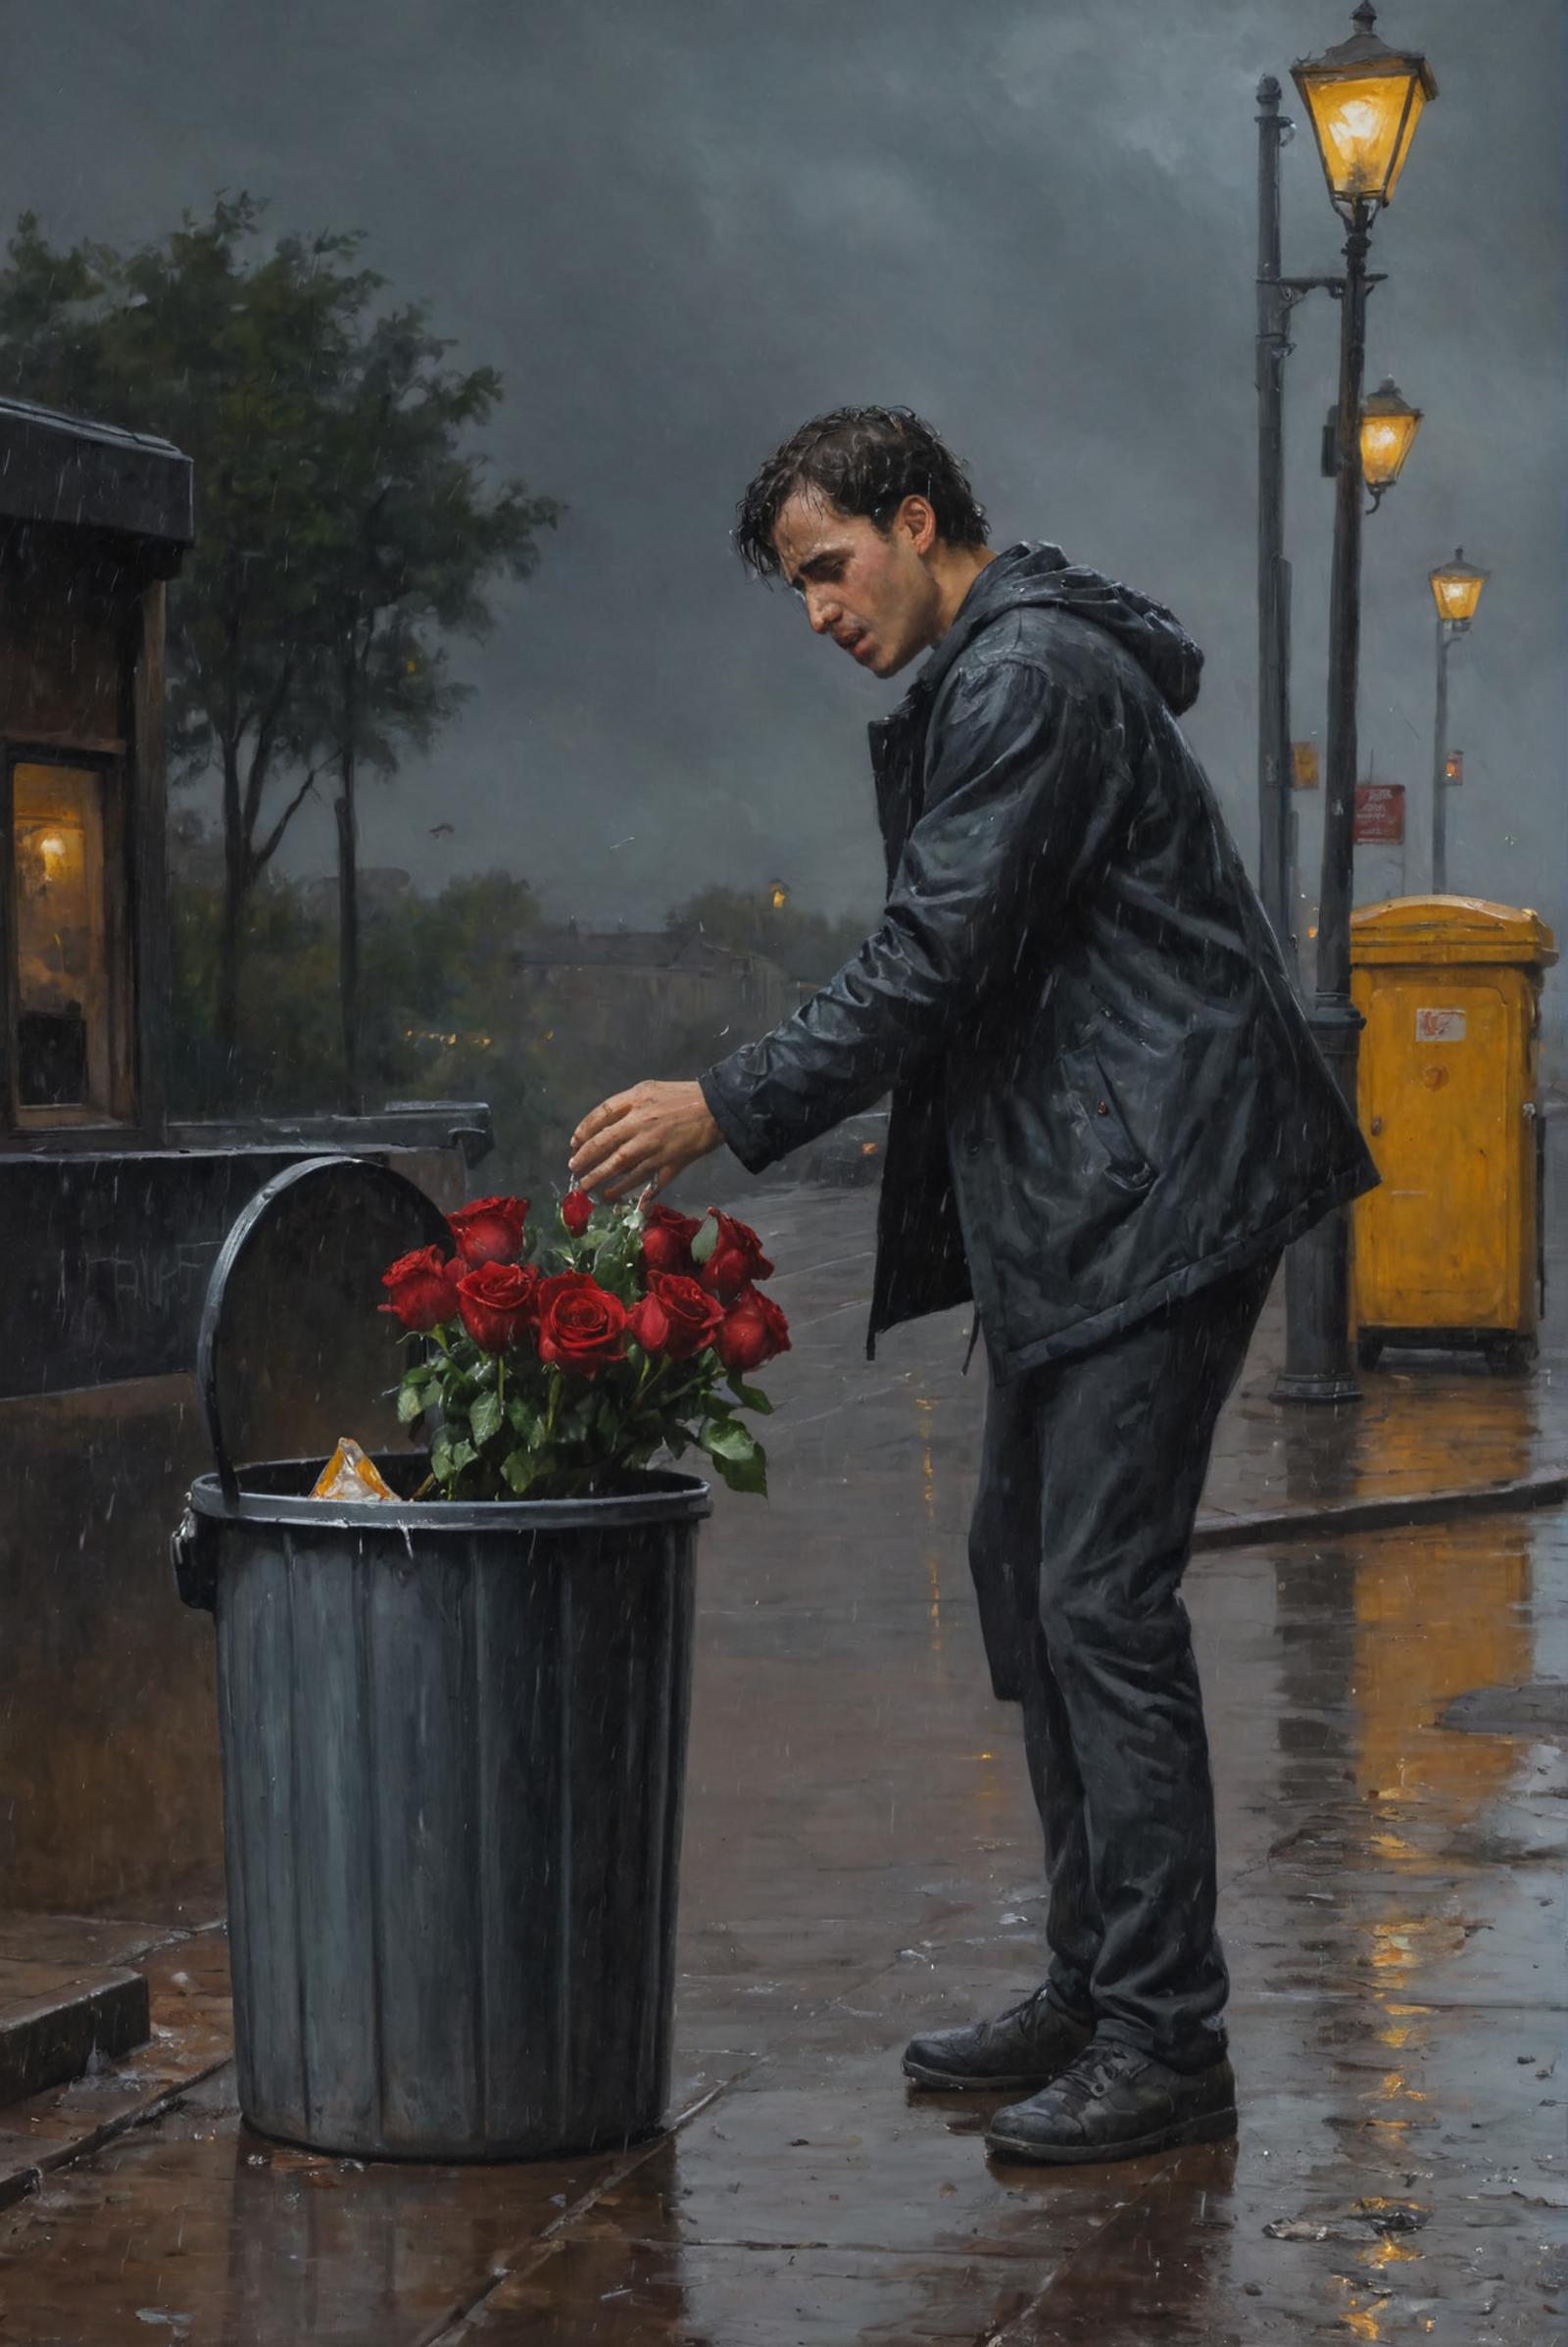 A man in a black jacket taking flowers out of a trash can.